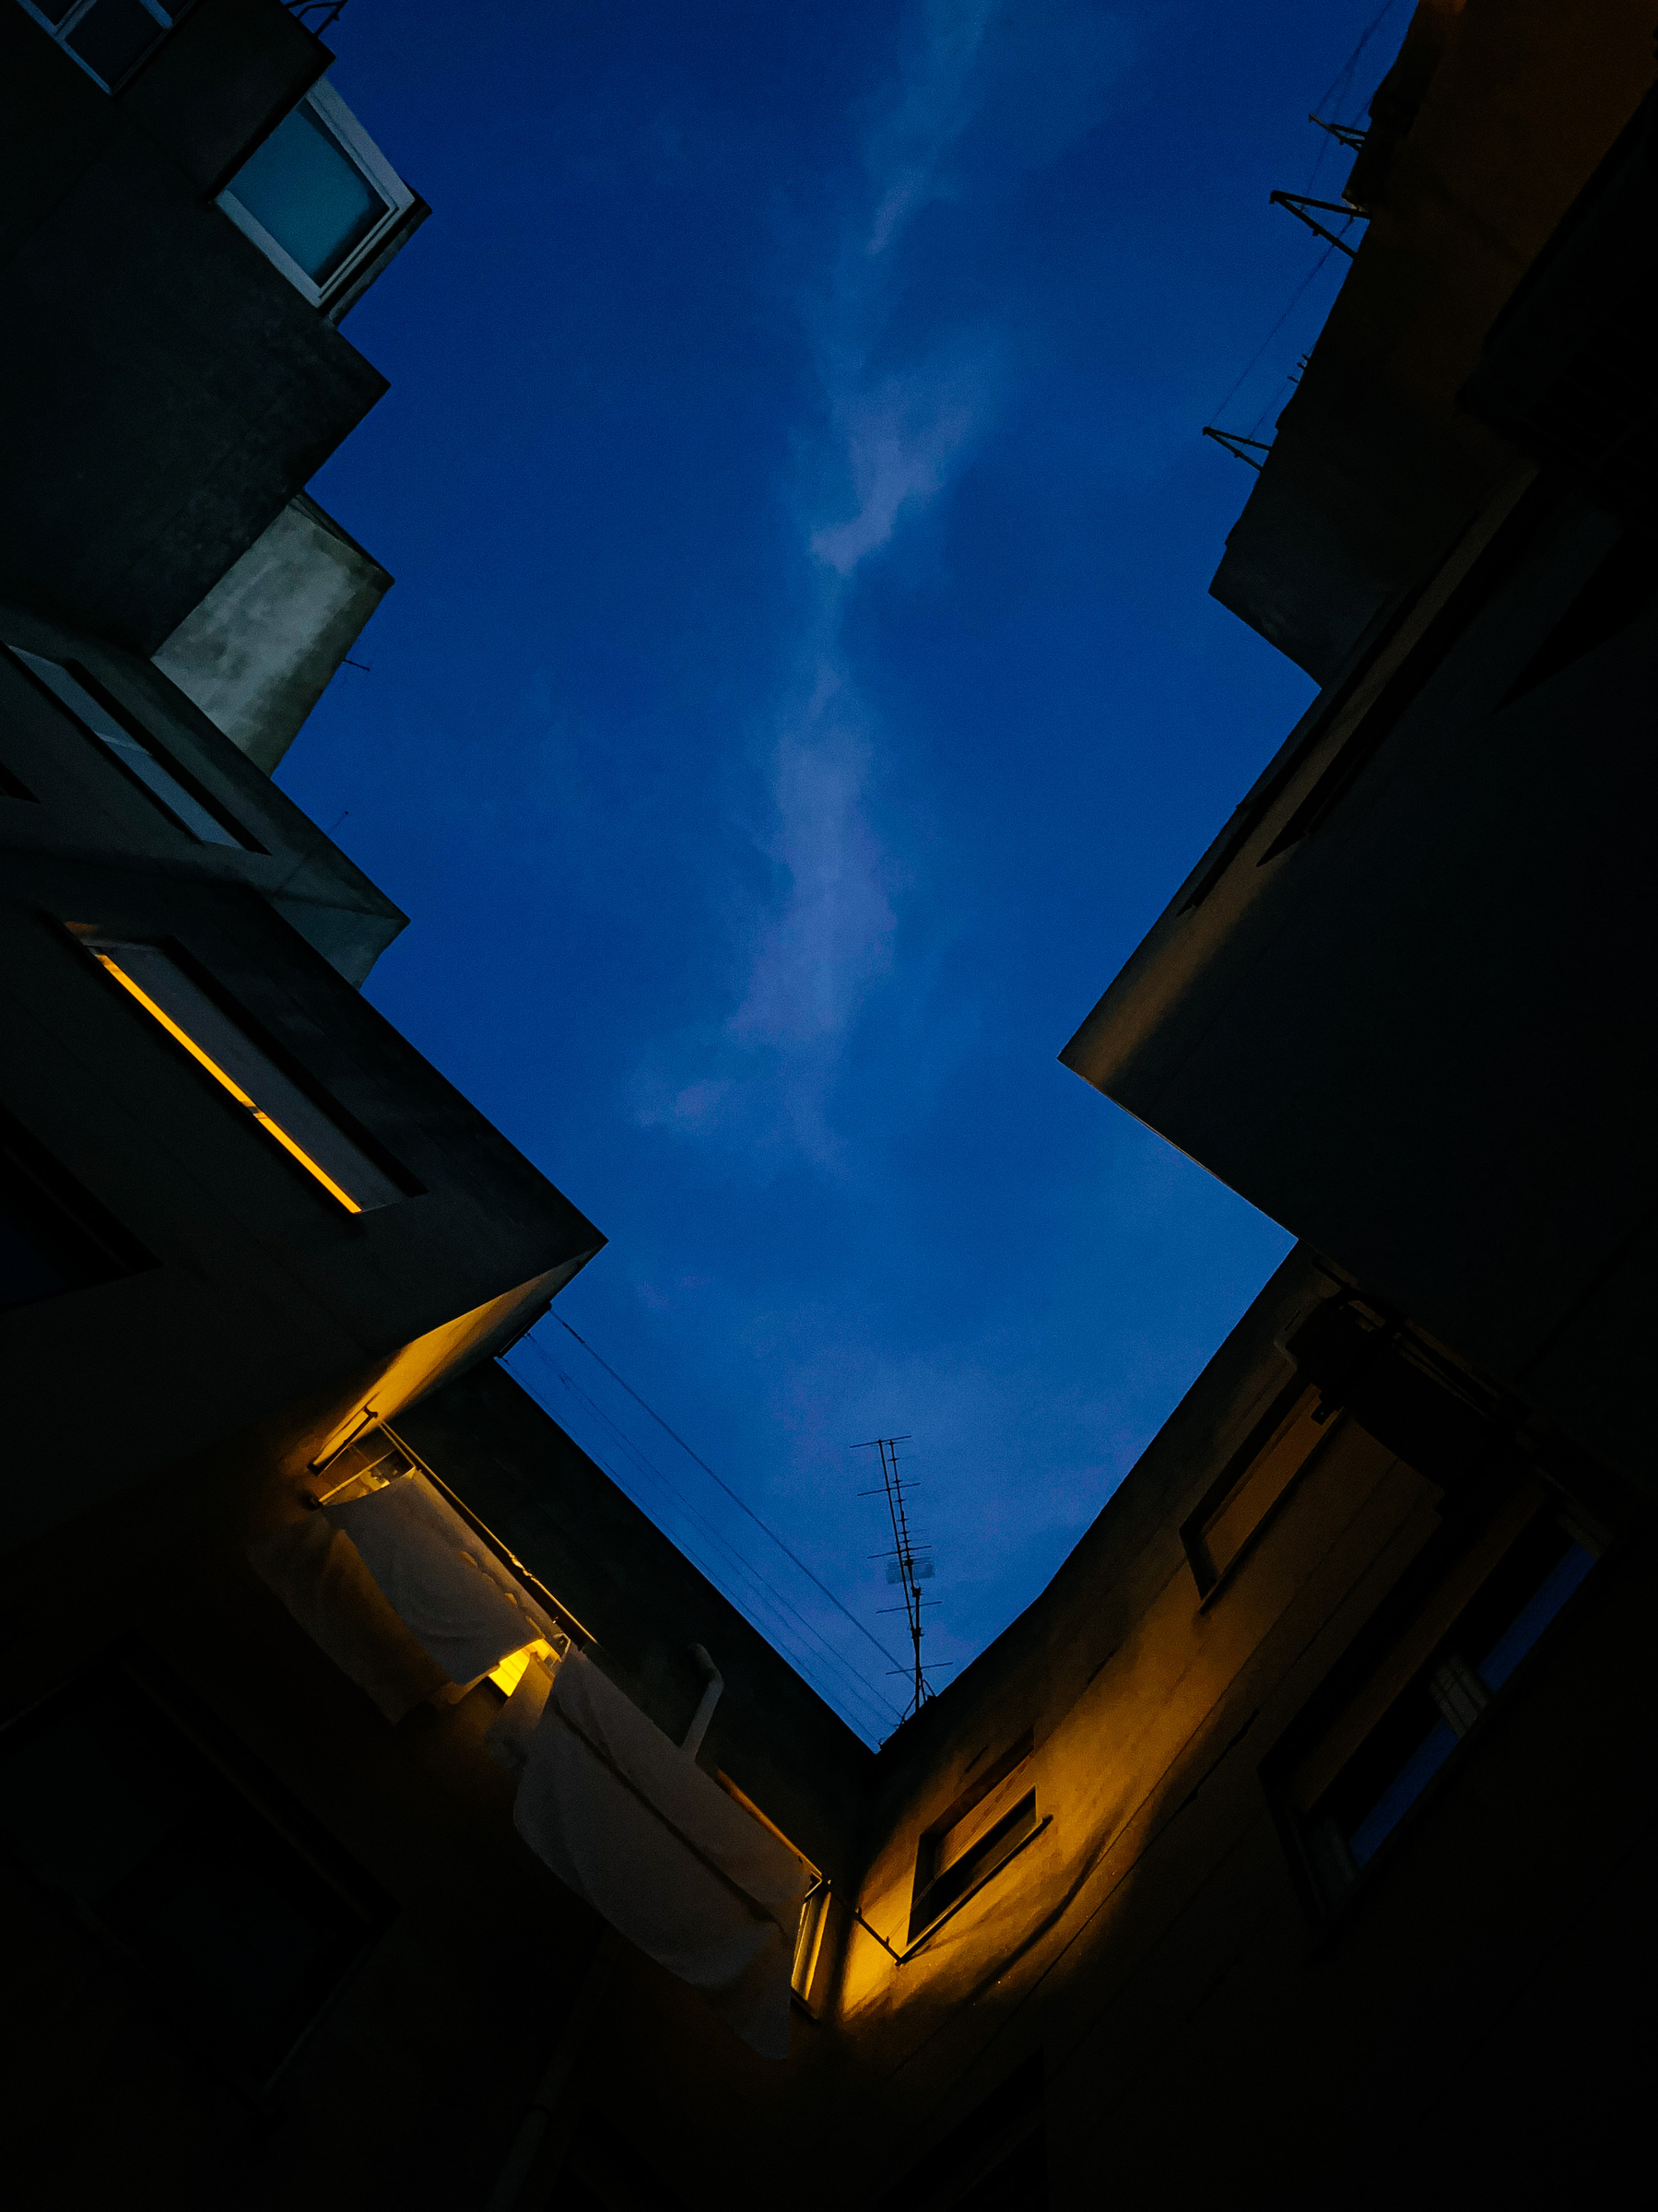 Looking up, right after sunset. Dark blue sky, framed by a building. Some of the windows have light coming out. 